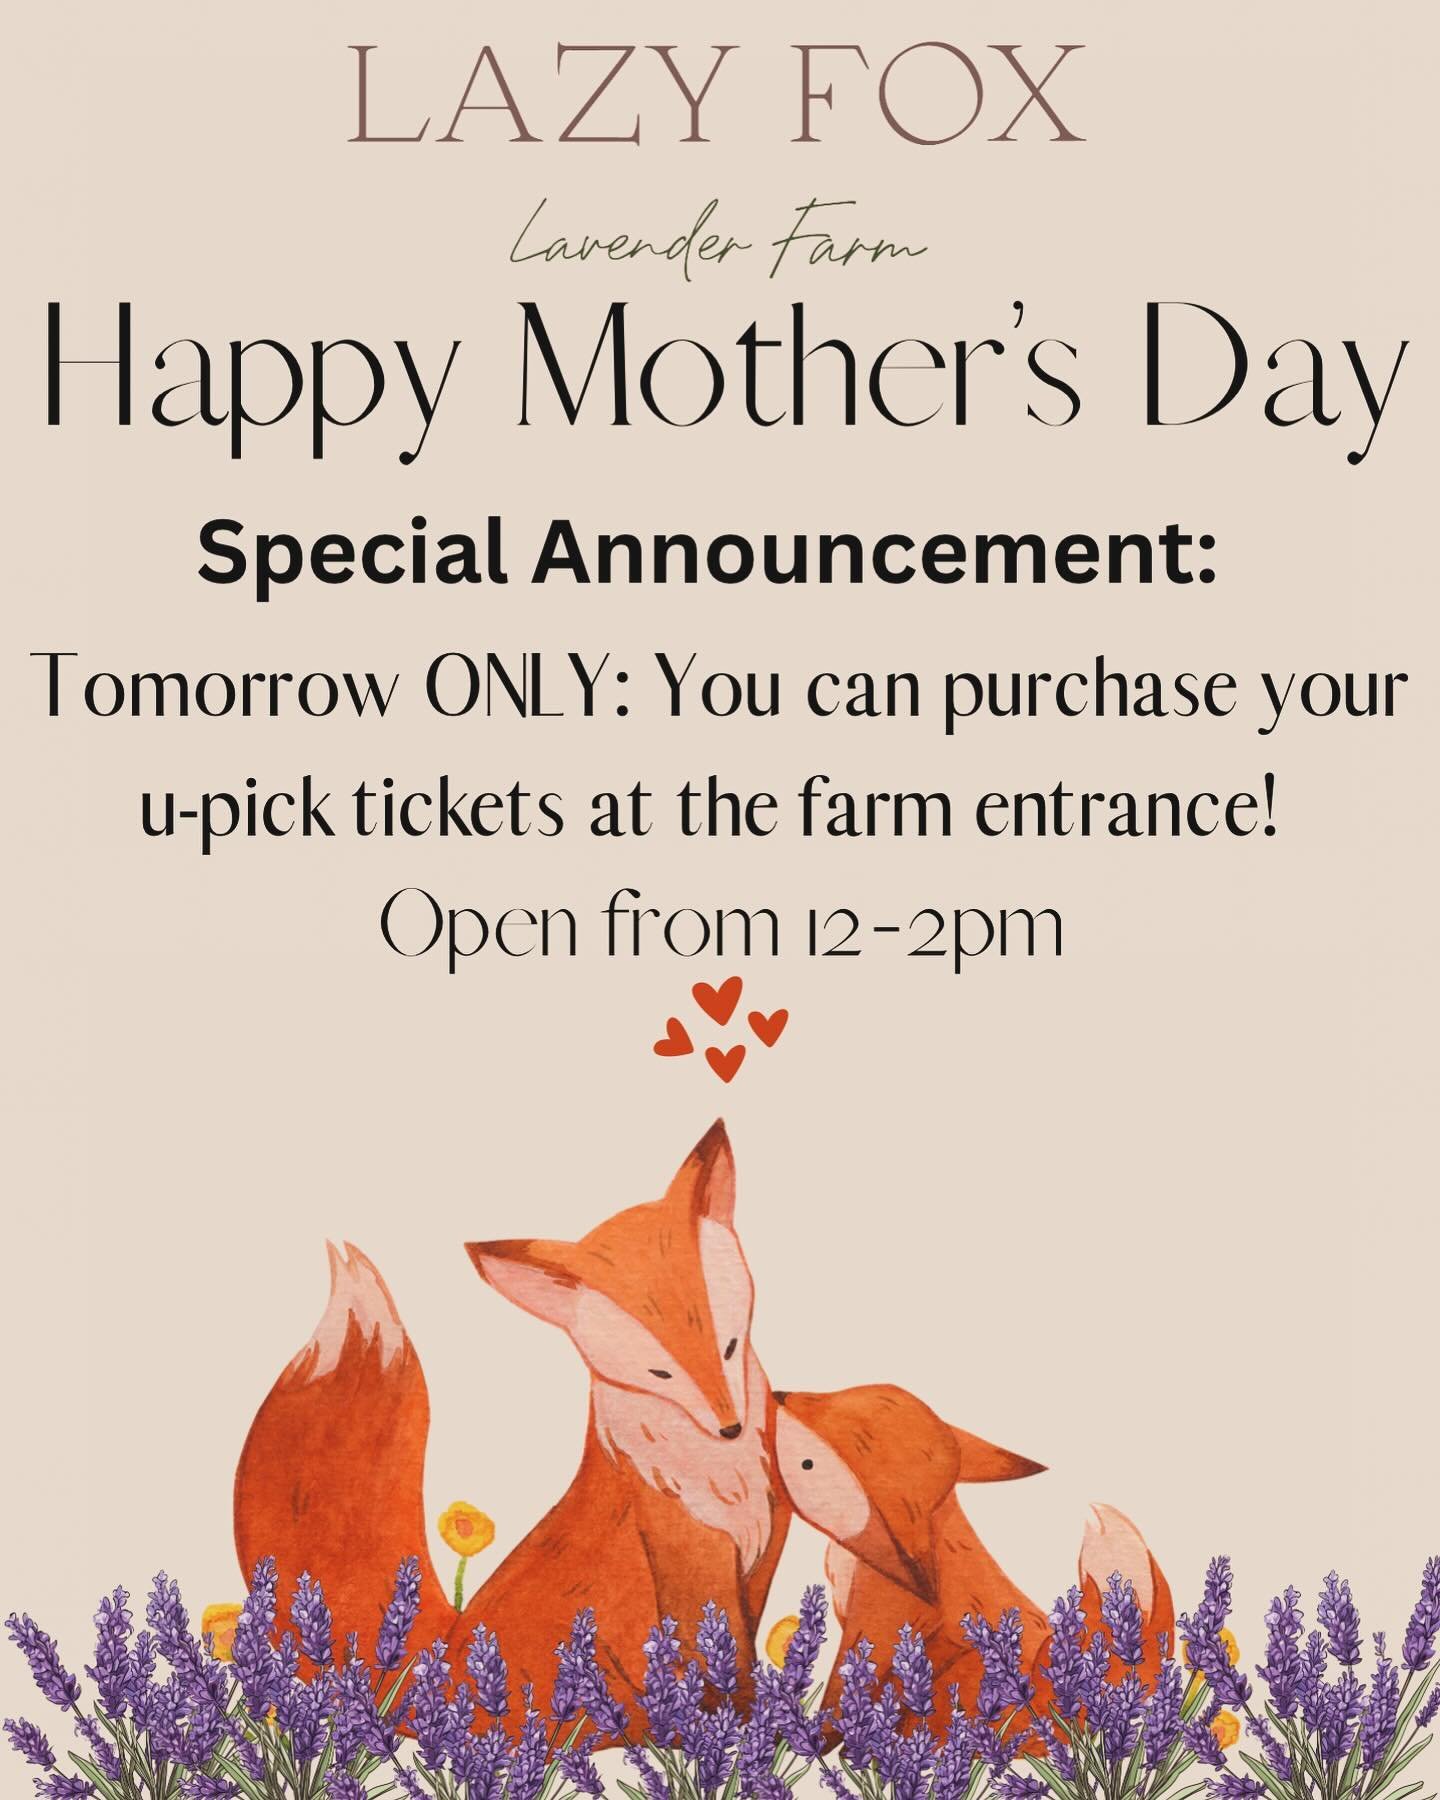 With the entrance ticket you can:
1. Enter the farm
2. Pick a bouquet of fresh lavender 
3. Shop in our Parlor Store
4. Bring a picnic lunch
5. Purchase ice cream &amp; lavender lemonade from @bigdippernc 
6. Meet our adorable heritage breed sheep
7.